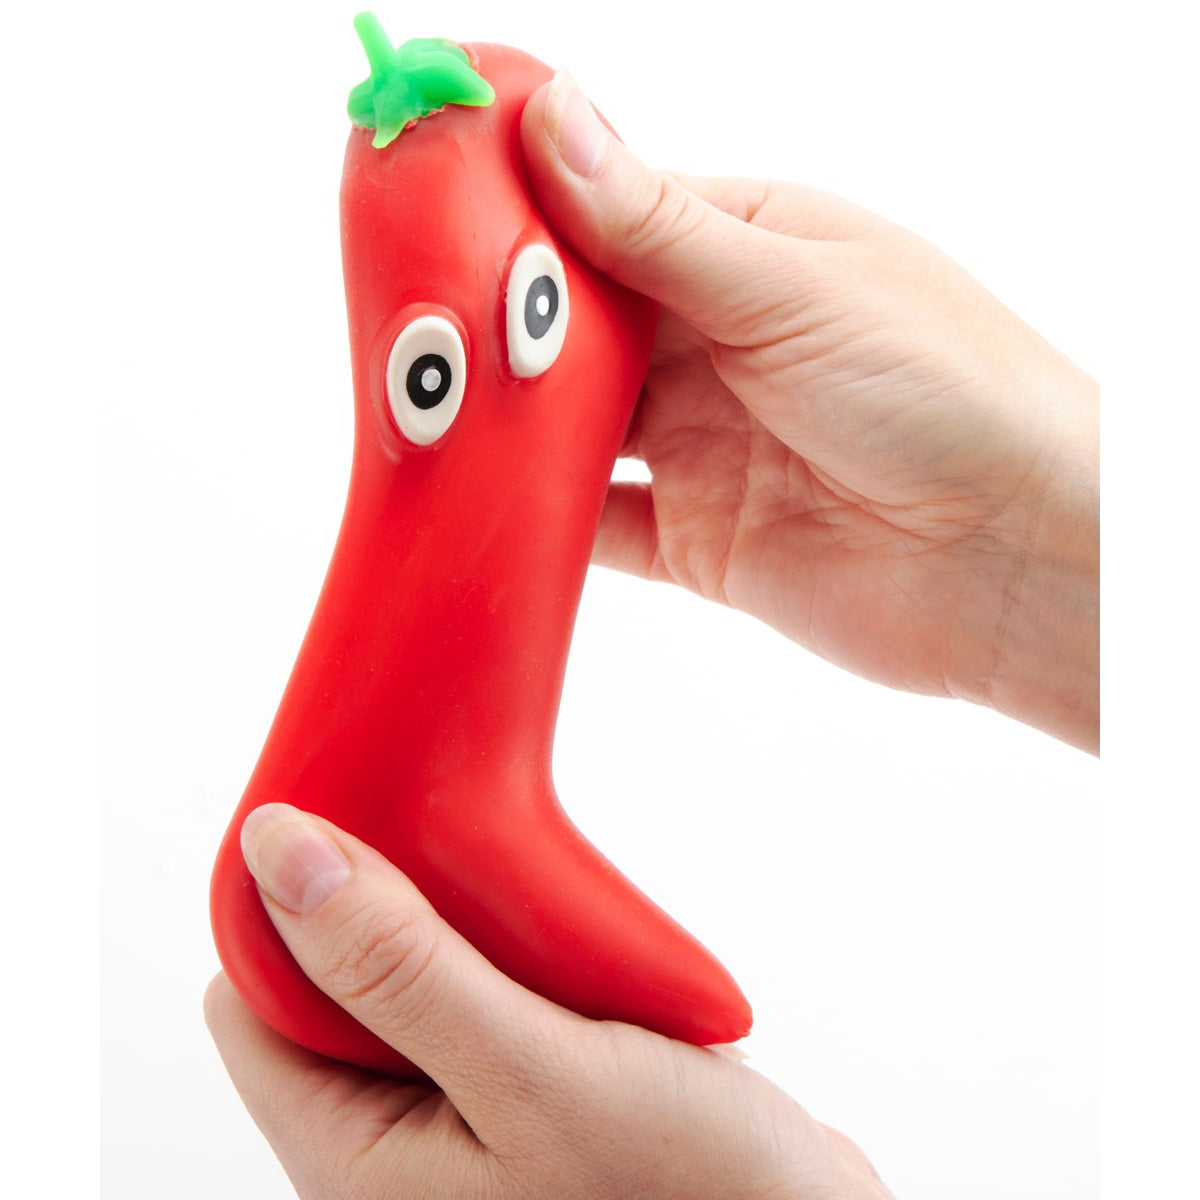 Stretchy Chili Stress Reliever